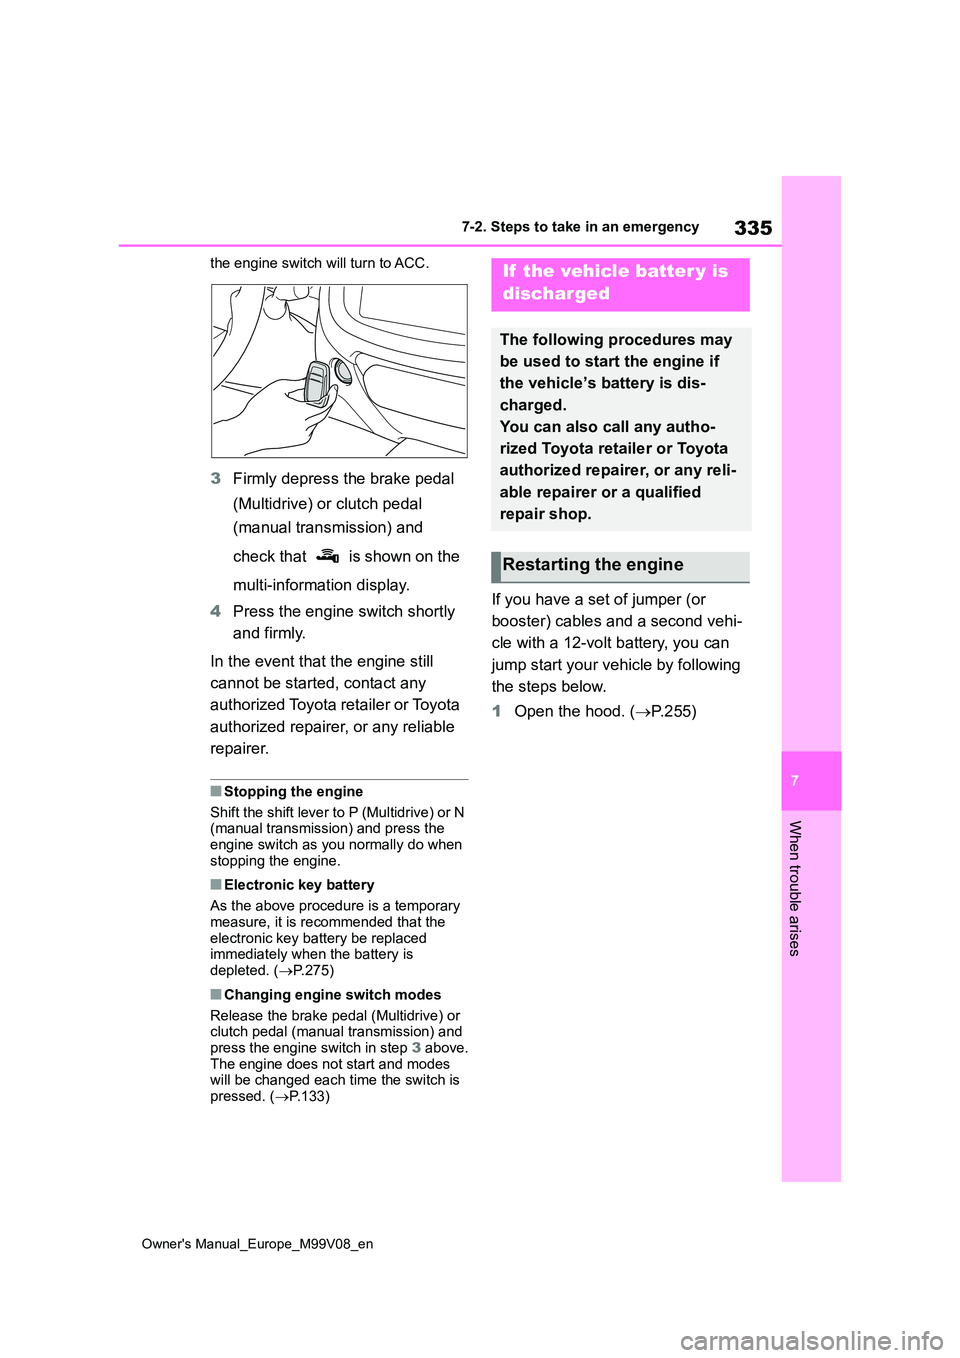 TOYOTA AYGO X 2022  Owners Manual (in English) 335
7
Owner's Manual_Europe_M99V08_en
7-2. Steps to take in an emergency
When trouble arises
the engine switch will turn to ACC.
3Firmly depress the brake pedal  
(Multidrive) or clutch pedal  
(m